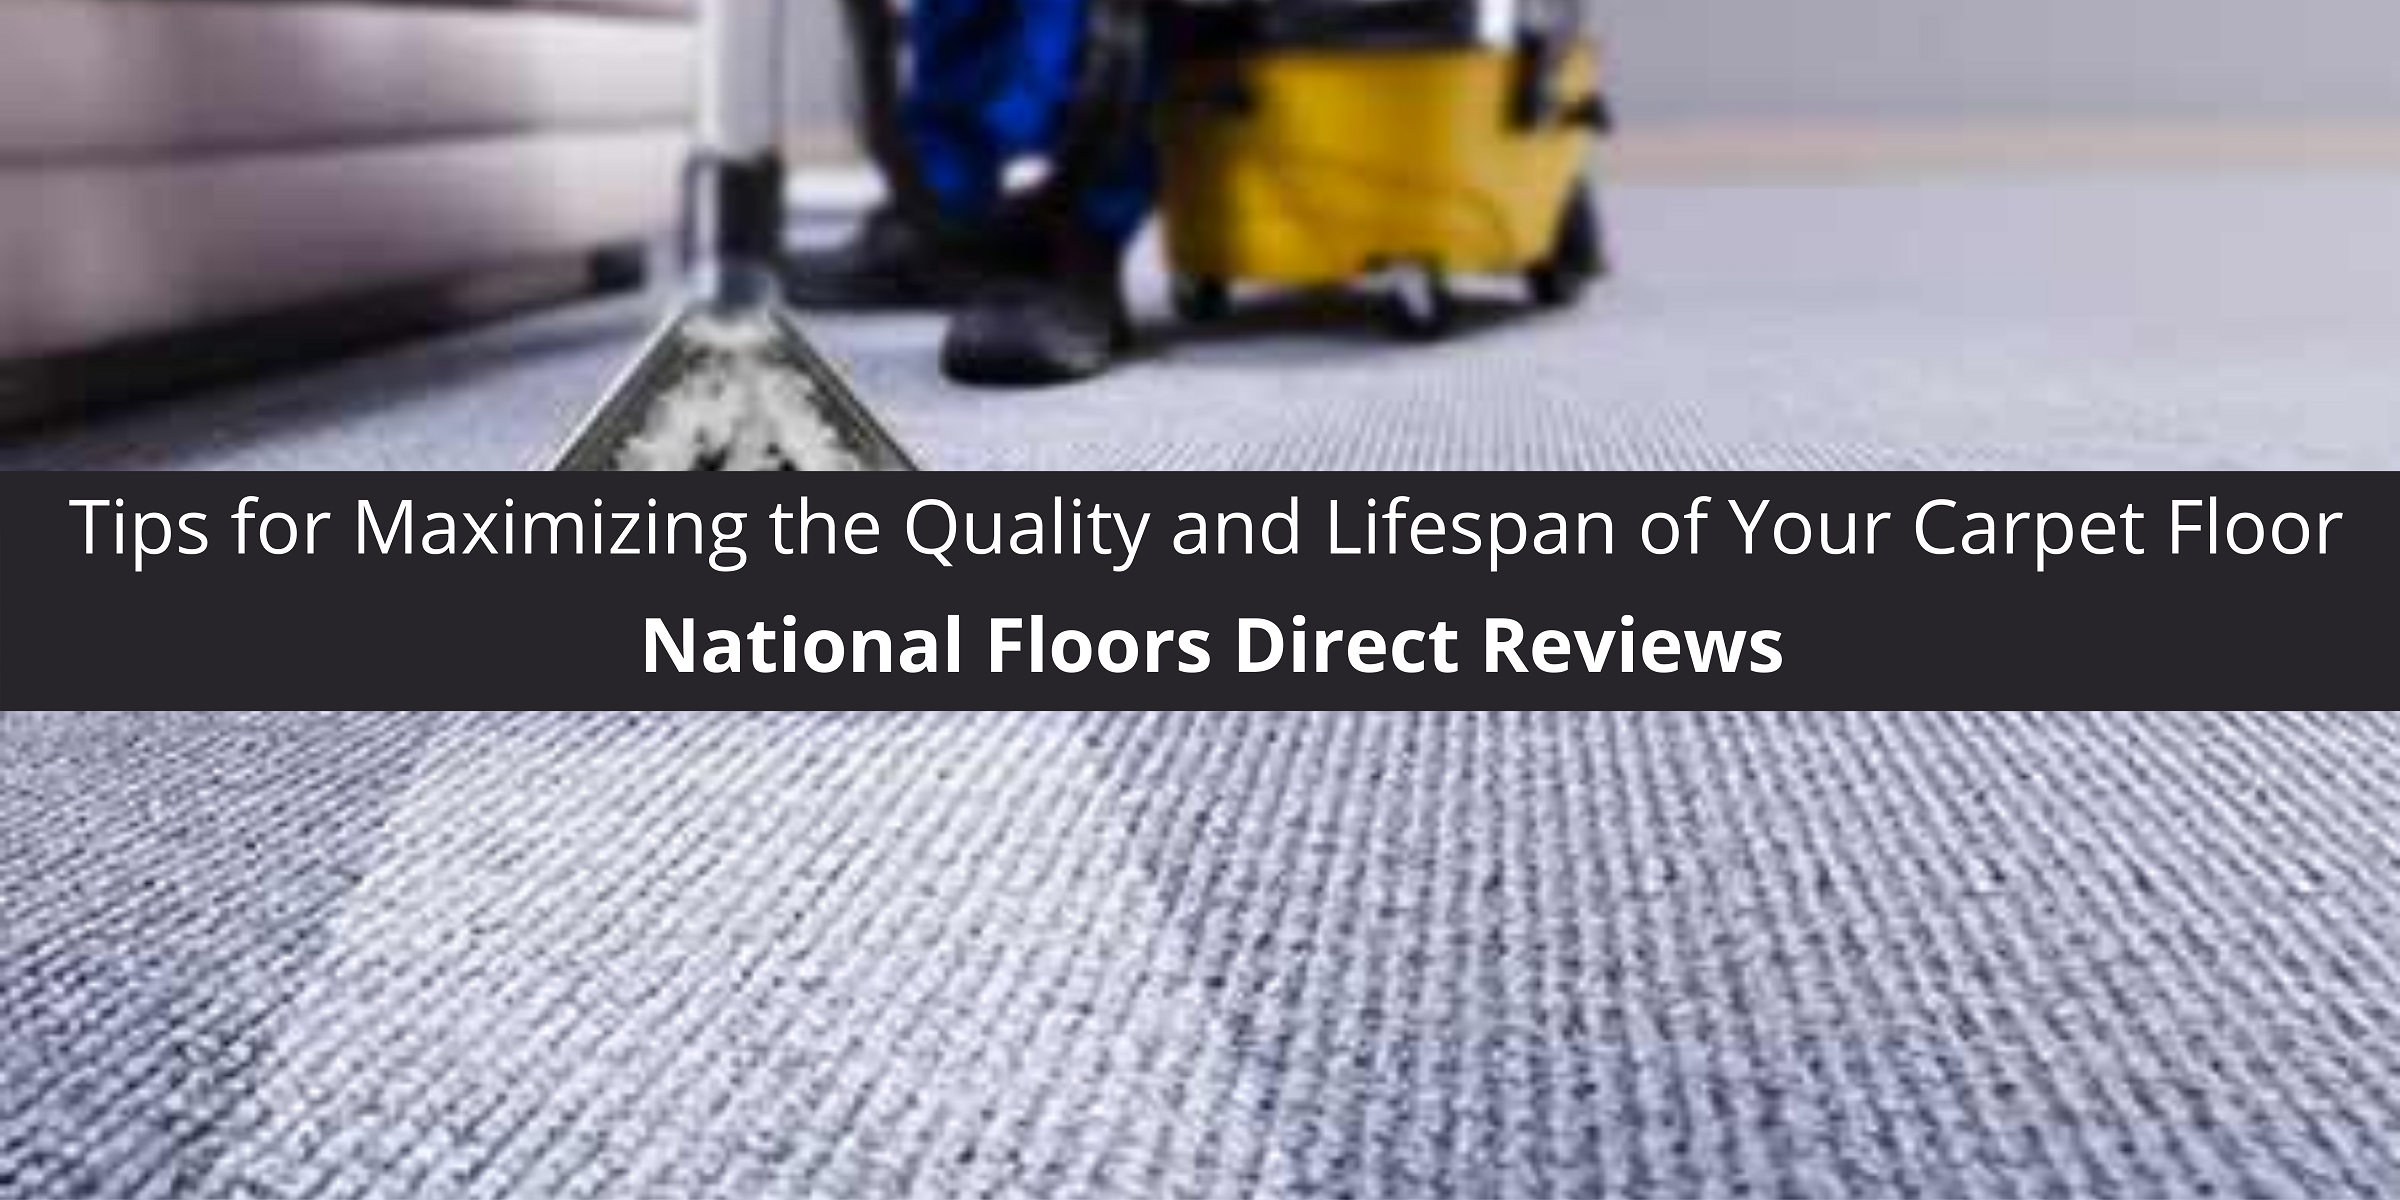 National Floors Direct Reviews Tips for Maximizing the Quality Lifespan